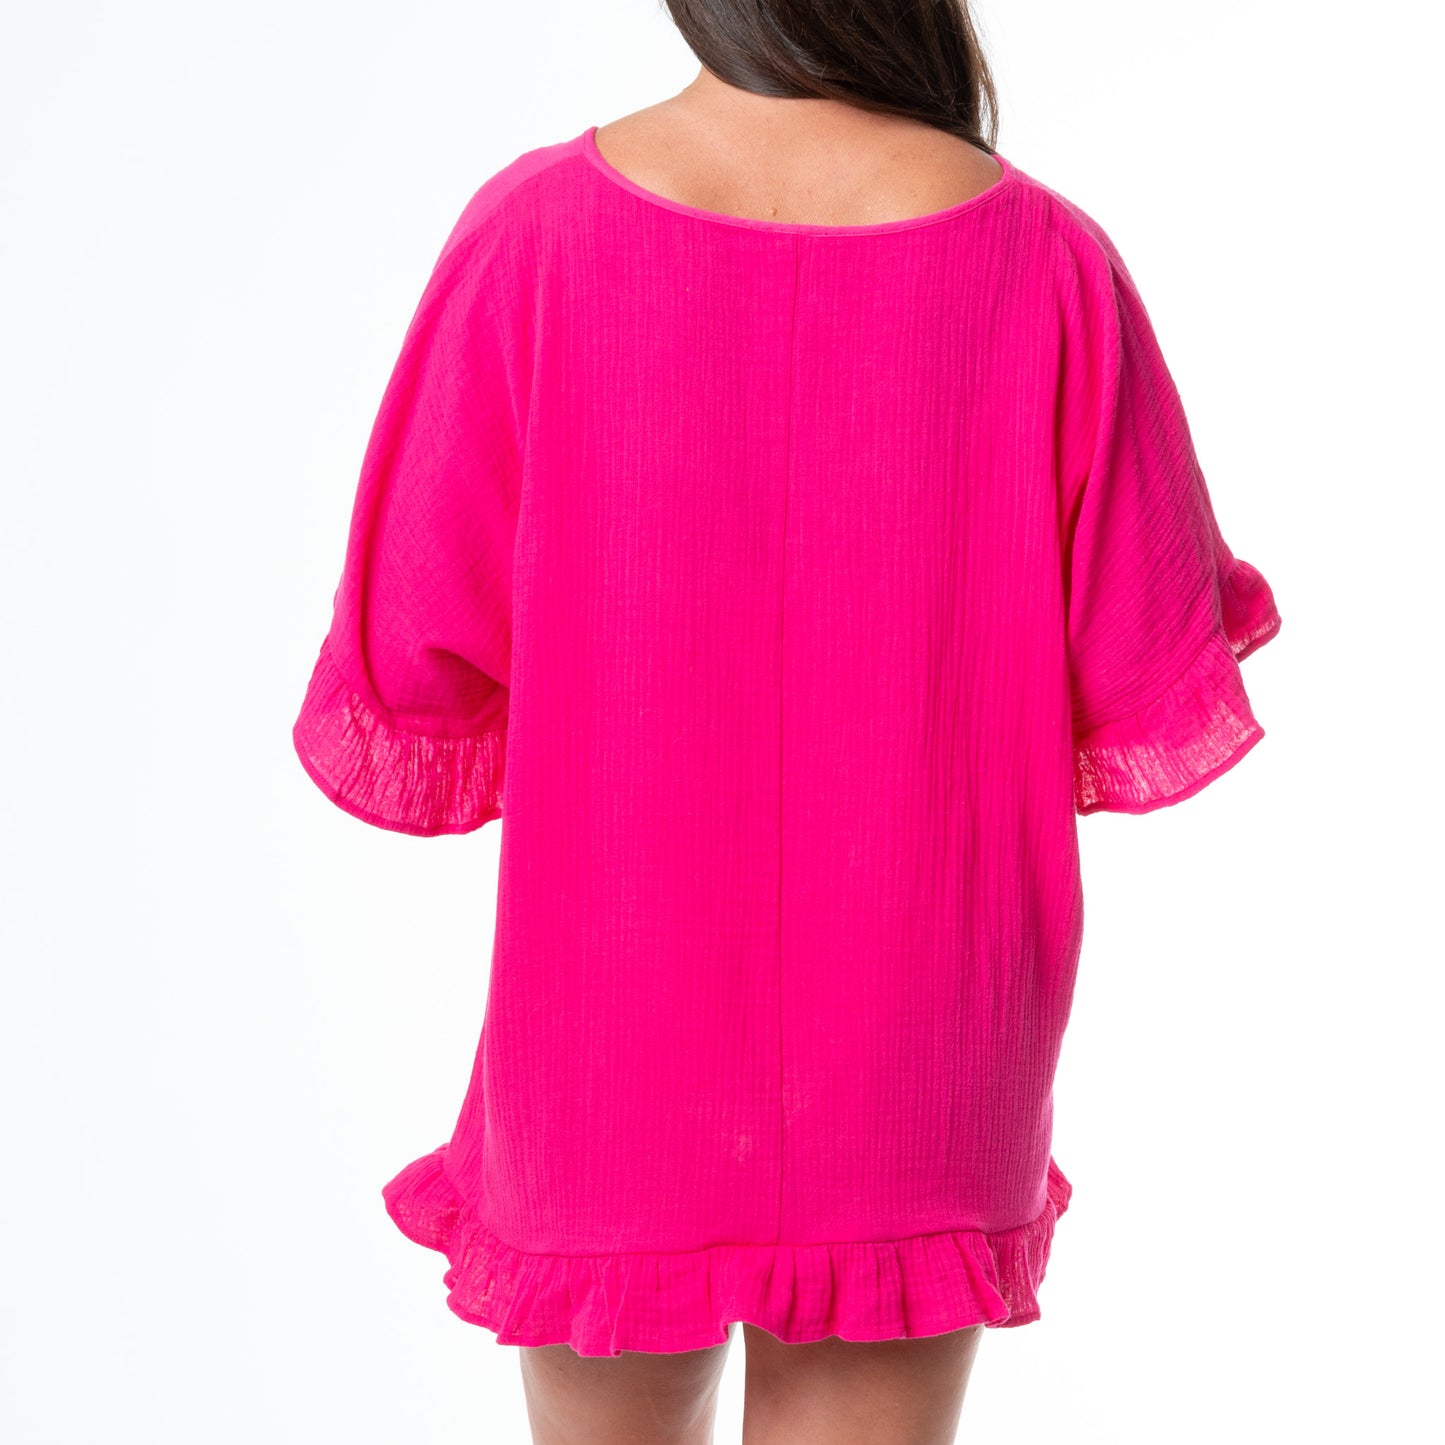 Demi One Size Ruffle Cotton Swimsuit Cover Up